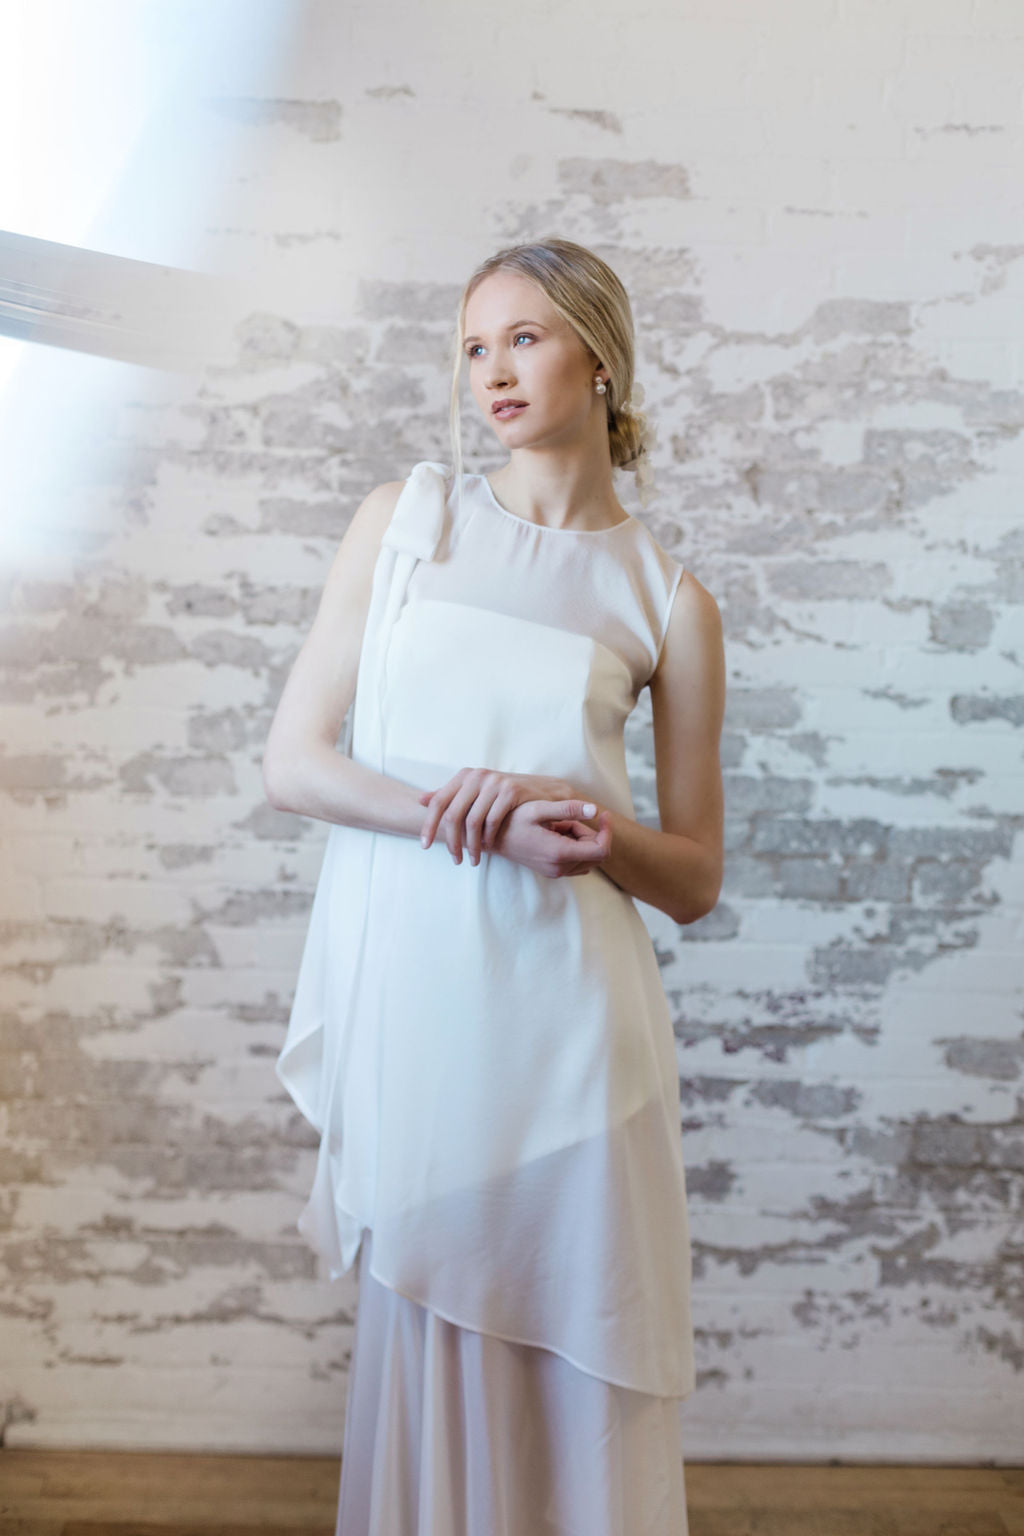 Modern wedding tunic and skirt. Sheer minimalist bridal separates. Designed and made in Canada.